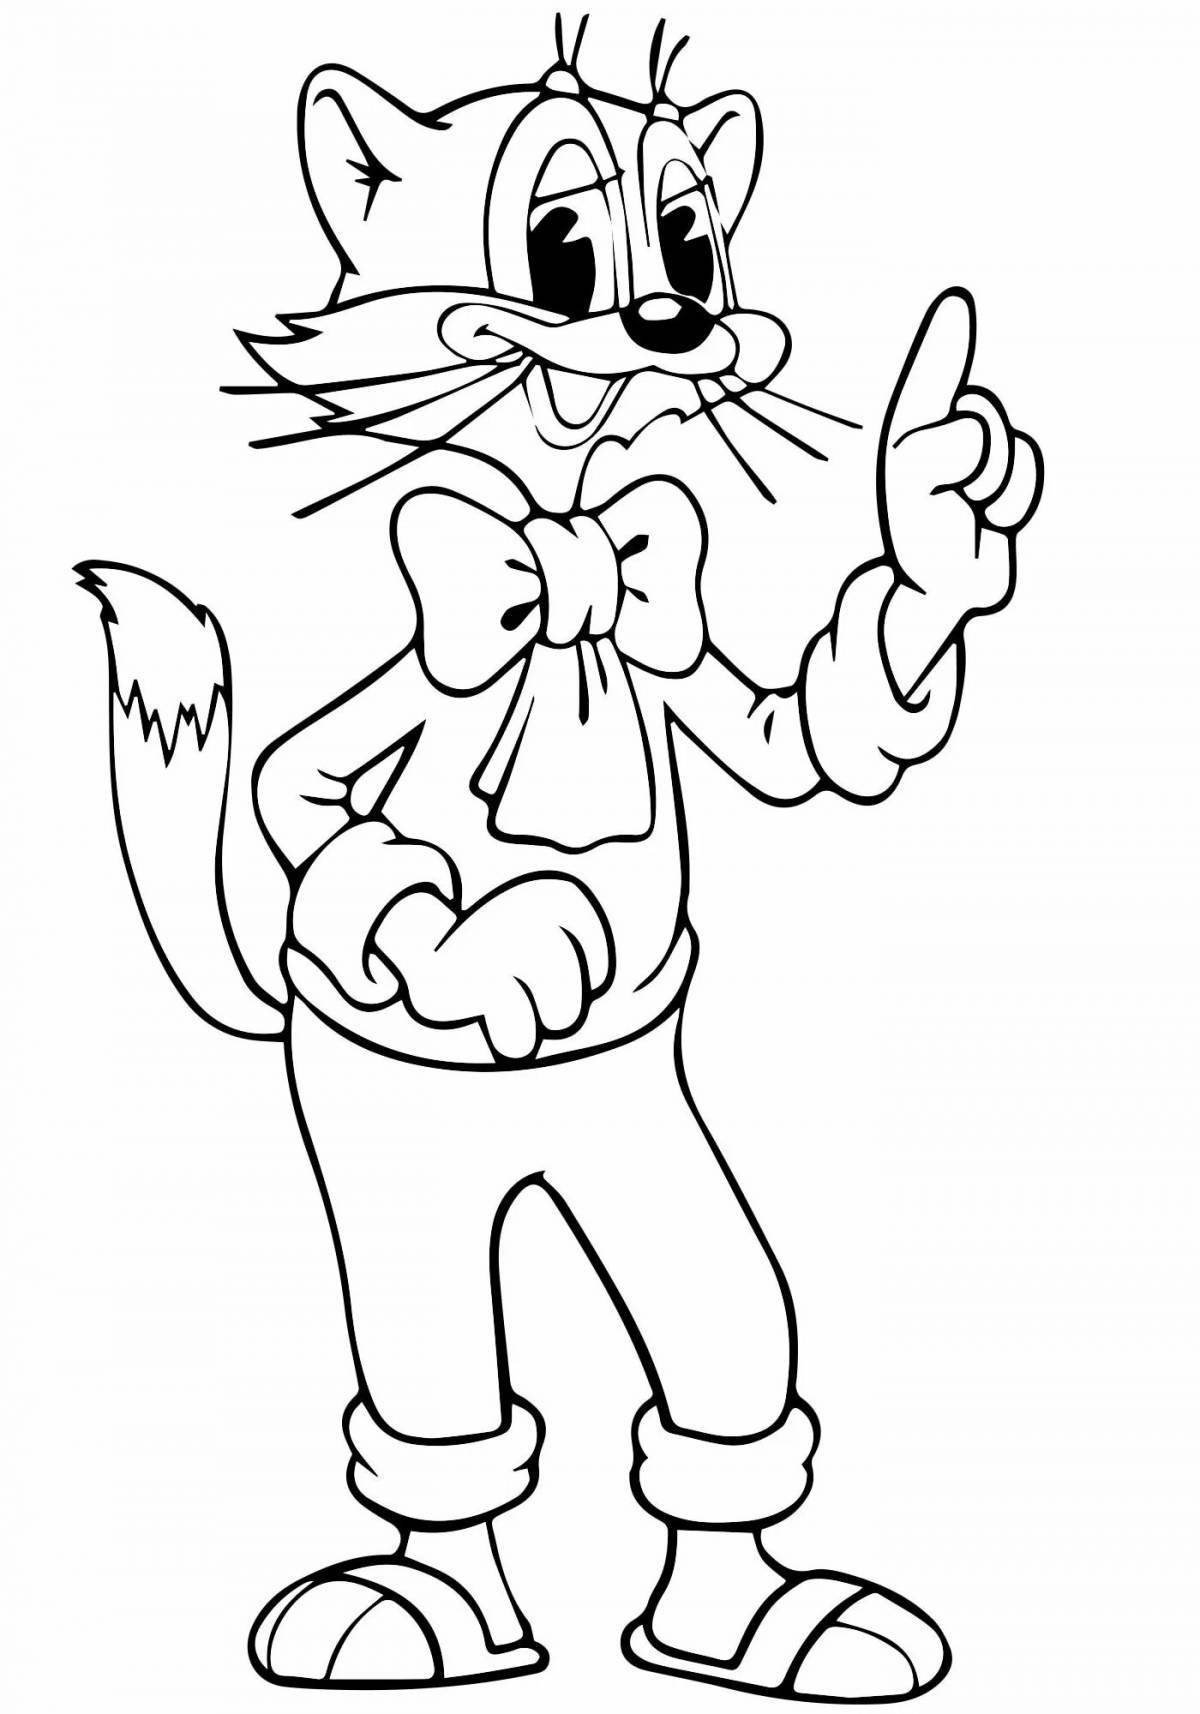 Crazy leopold coloring page